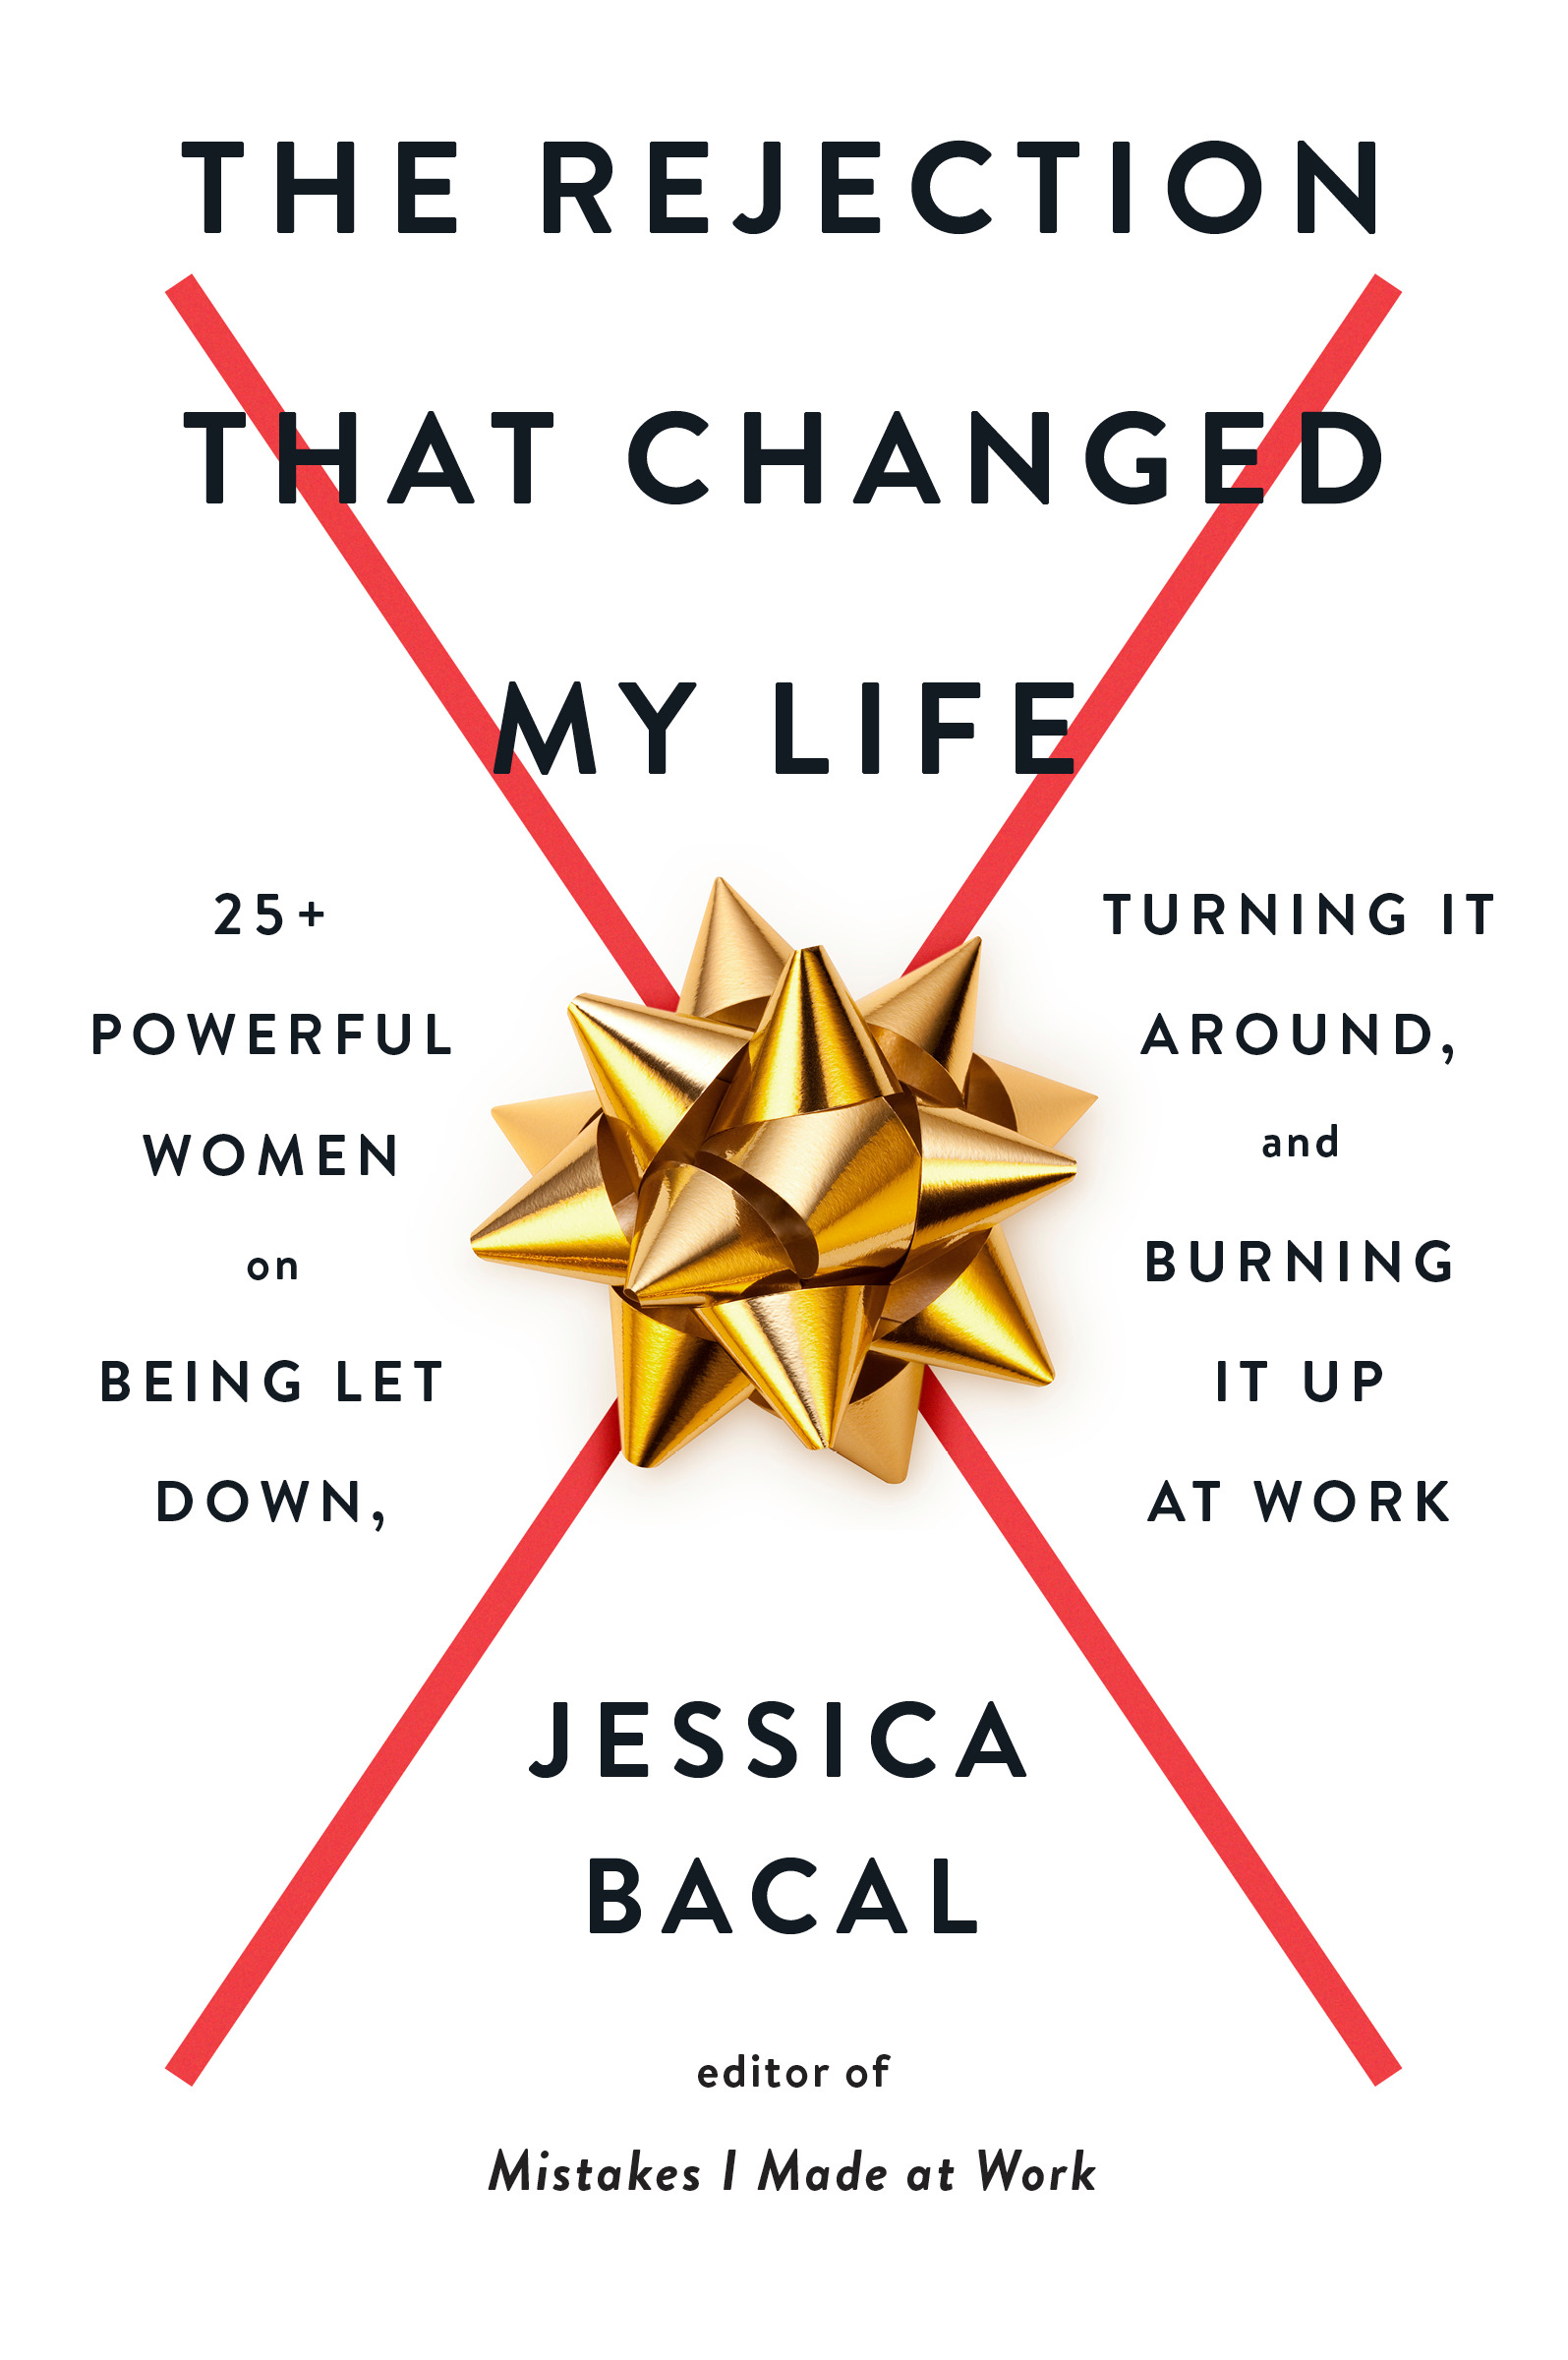 The Rejection That Changed My Life : 25+ Powerful Women on Being Let Down, Turning It Around, and Burning It Up at Work | Bacal, Jessica